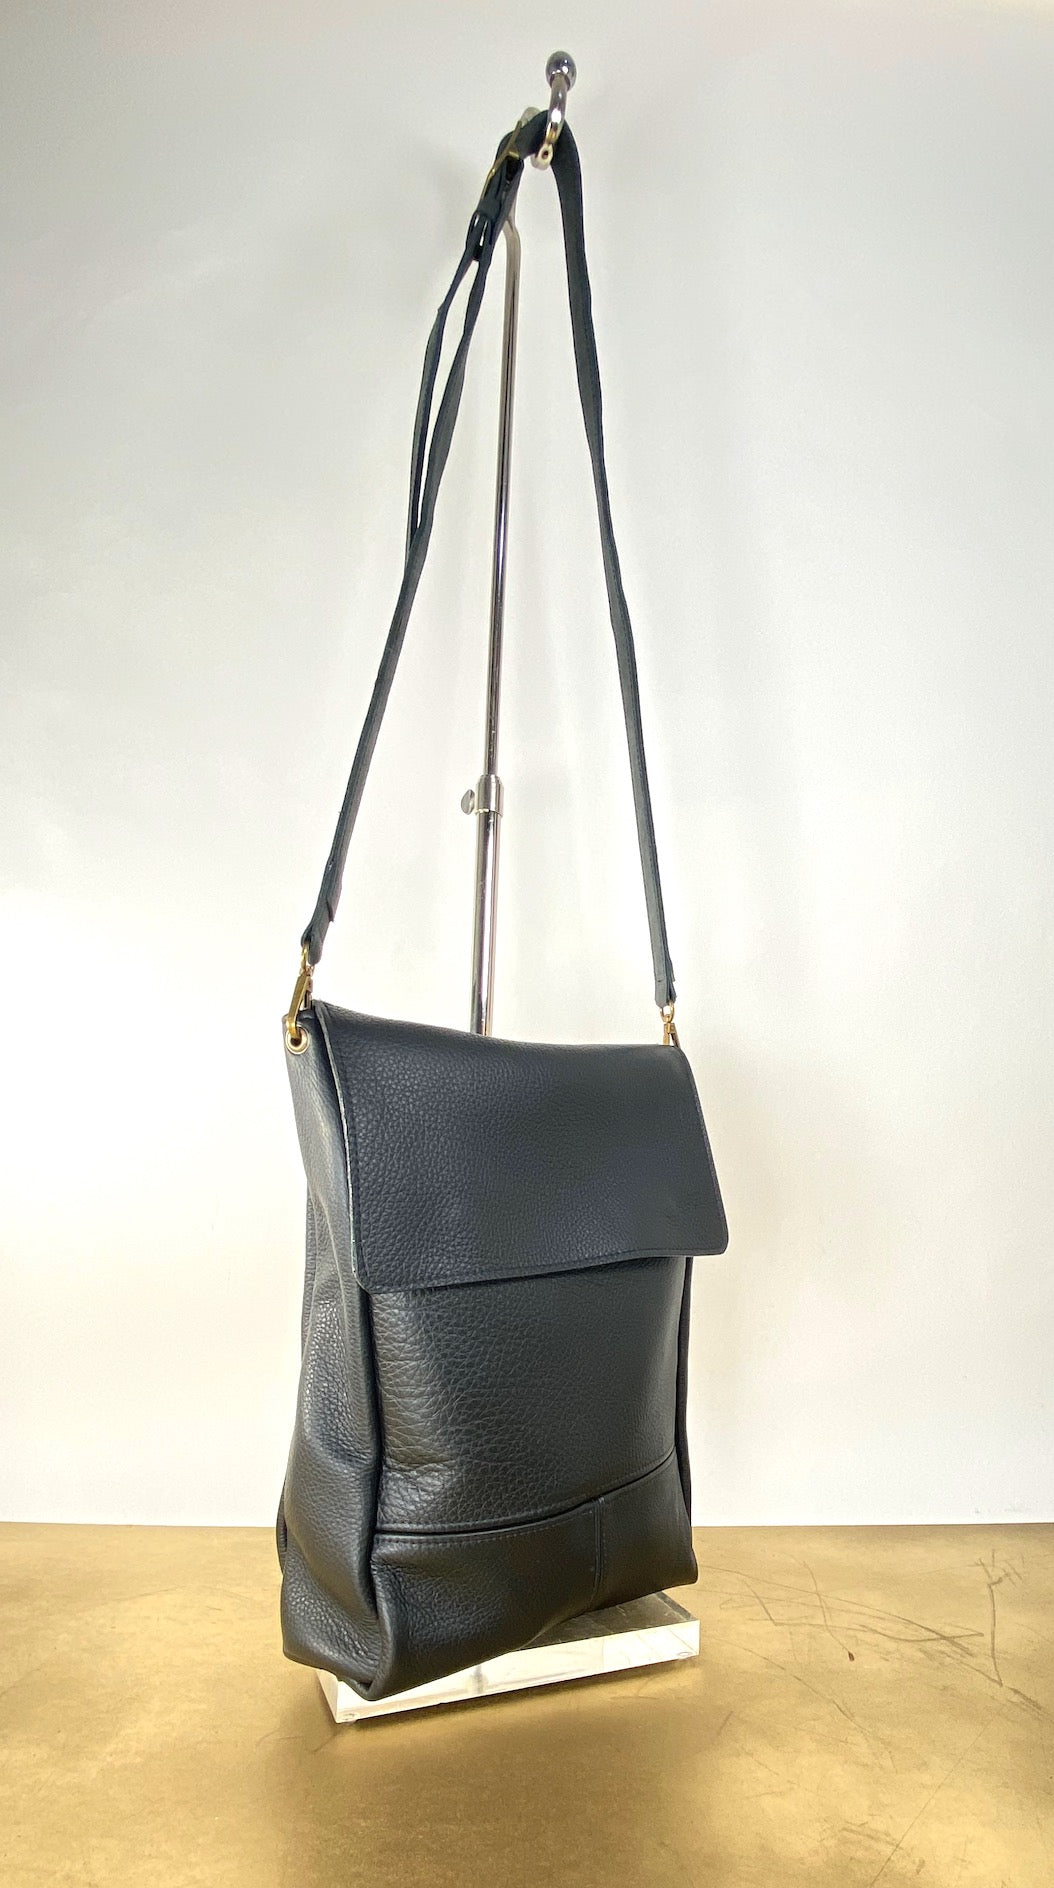 The Unison Bag in Black Chrome Tanned Leather